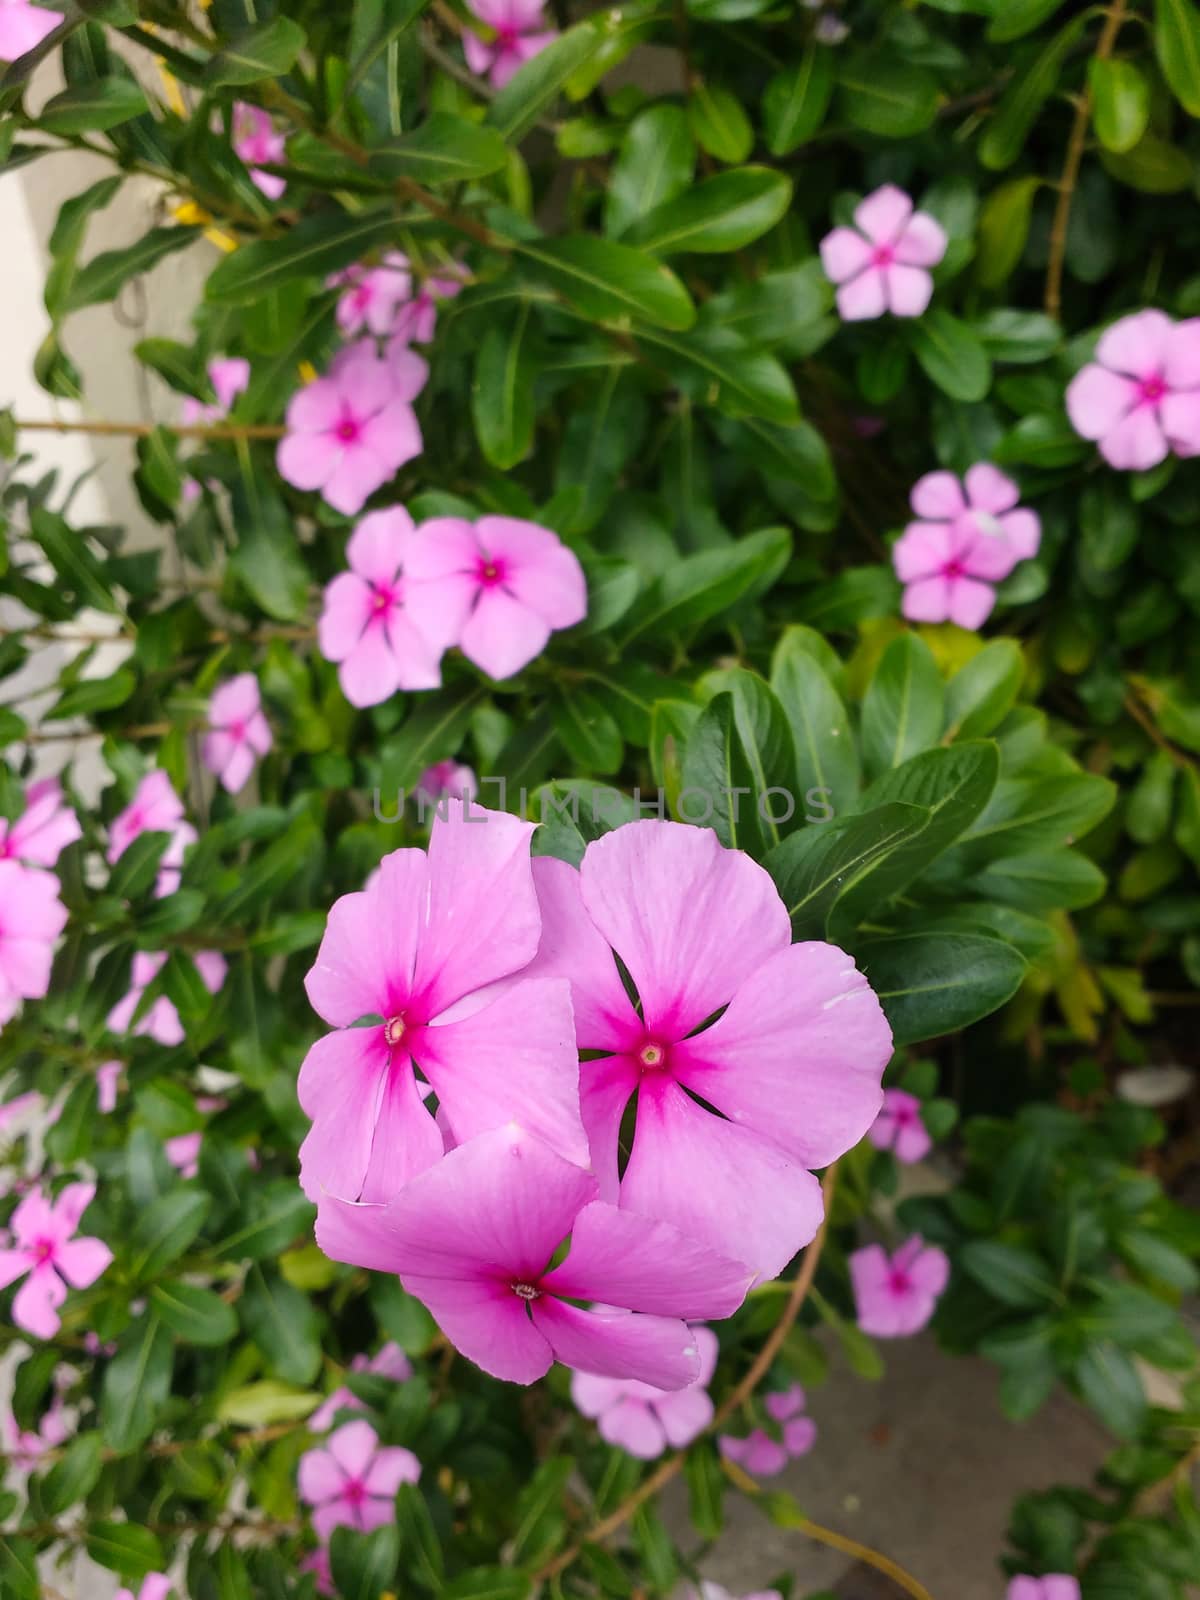 Catharanthus roseus, Gardens with delicate pink flowers of shameless maria, and green leaves in the background.